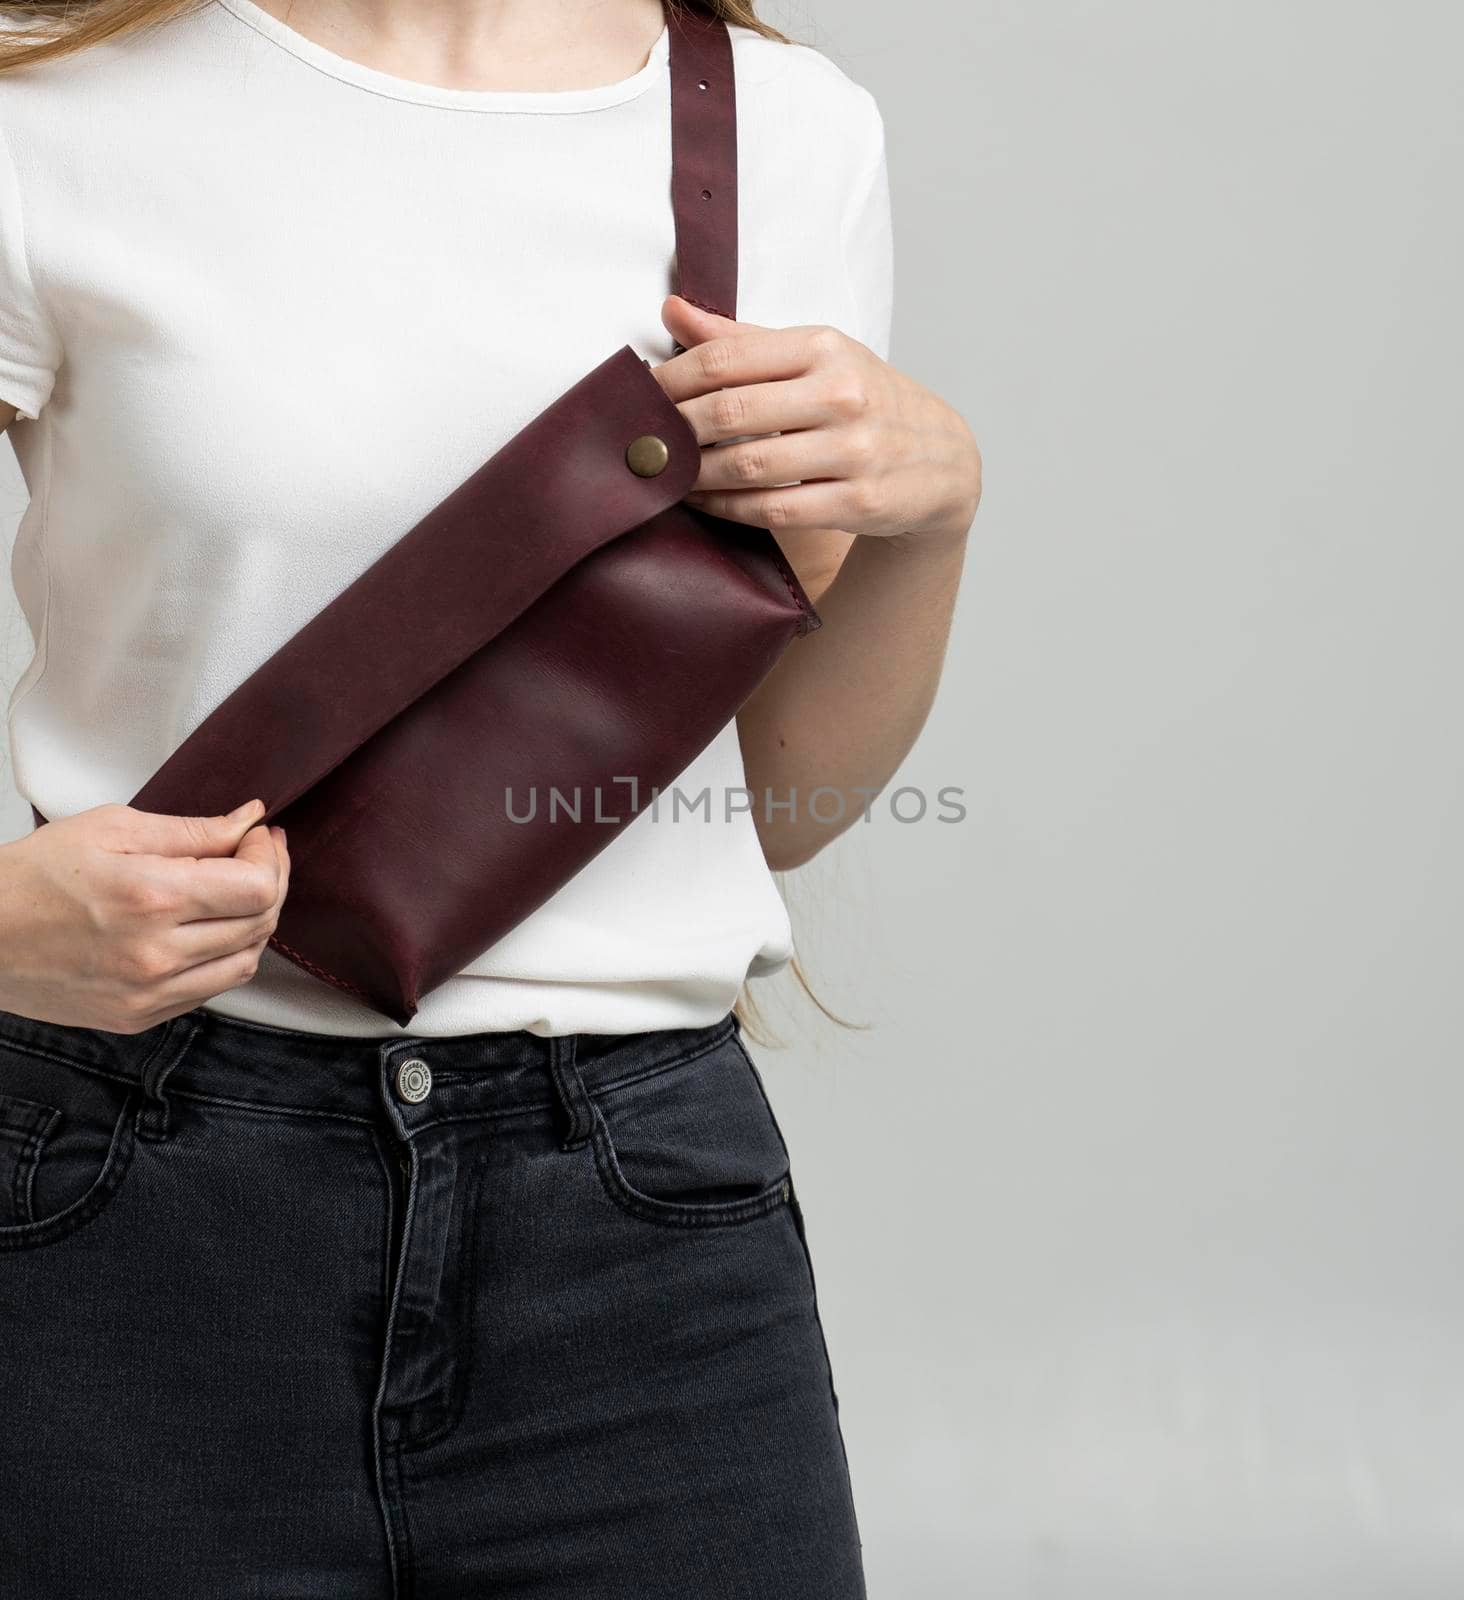 Girl in a white blouse with a leather red handmade bag over her shoulder. Designer dark red banana bag. Woman in a studio. Comfortable small bag for walking